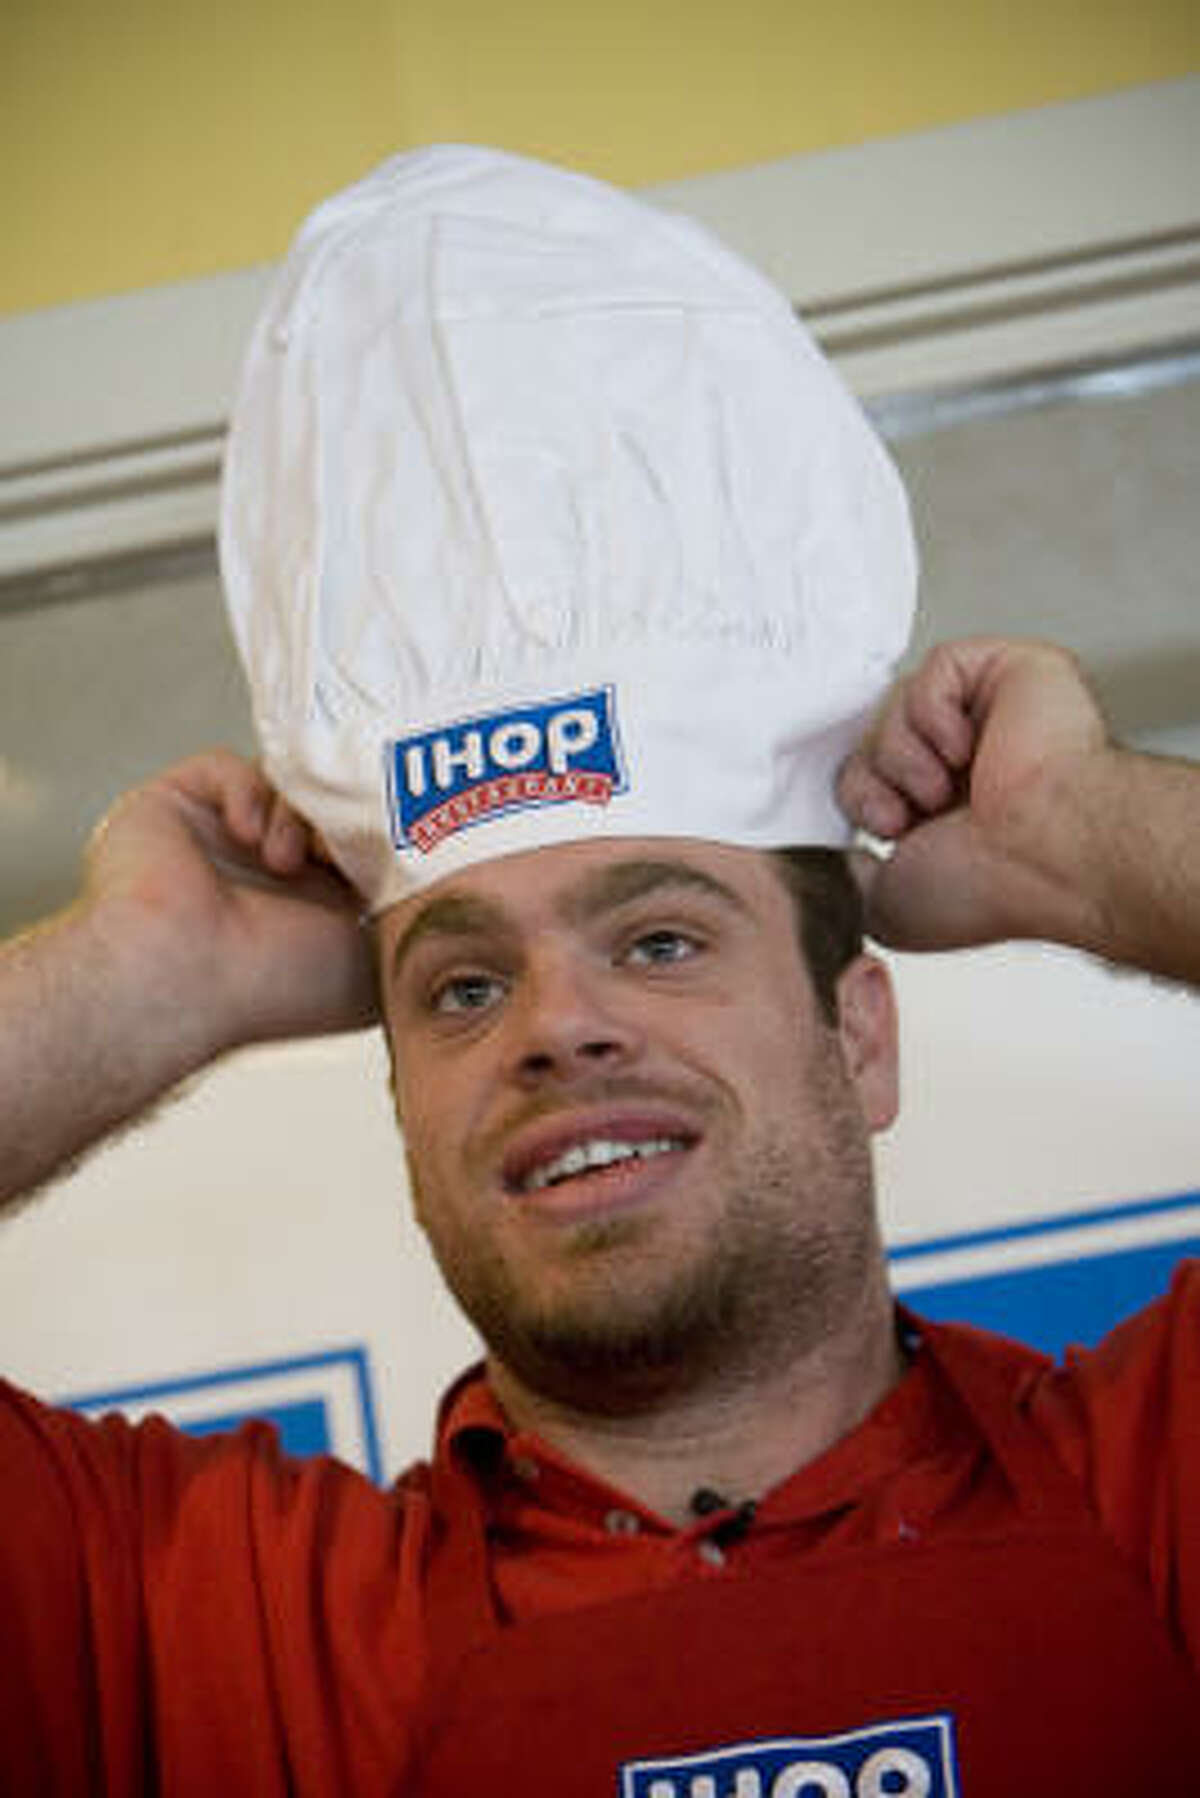 Eric Winston of the Houston Texans puts on a chef's hat before the competition. Winston claimed it was a tie, and they agreed upon beforehand that a tie would go to Duncan.